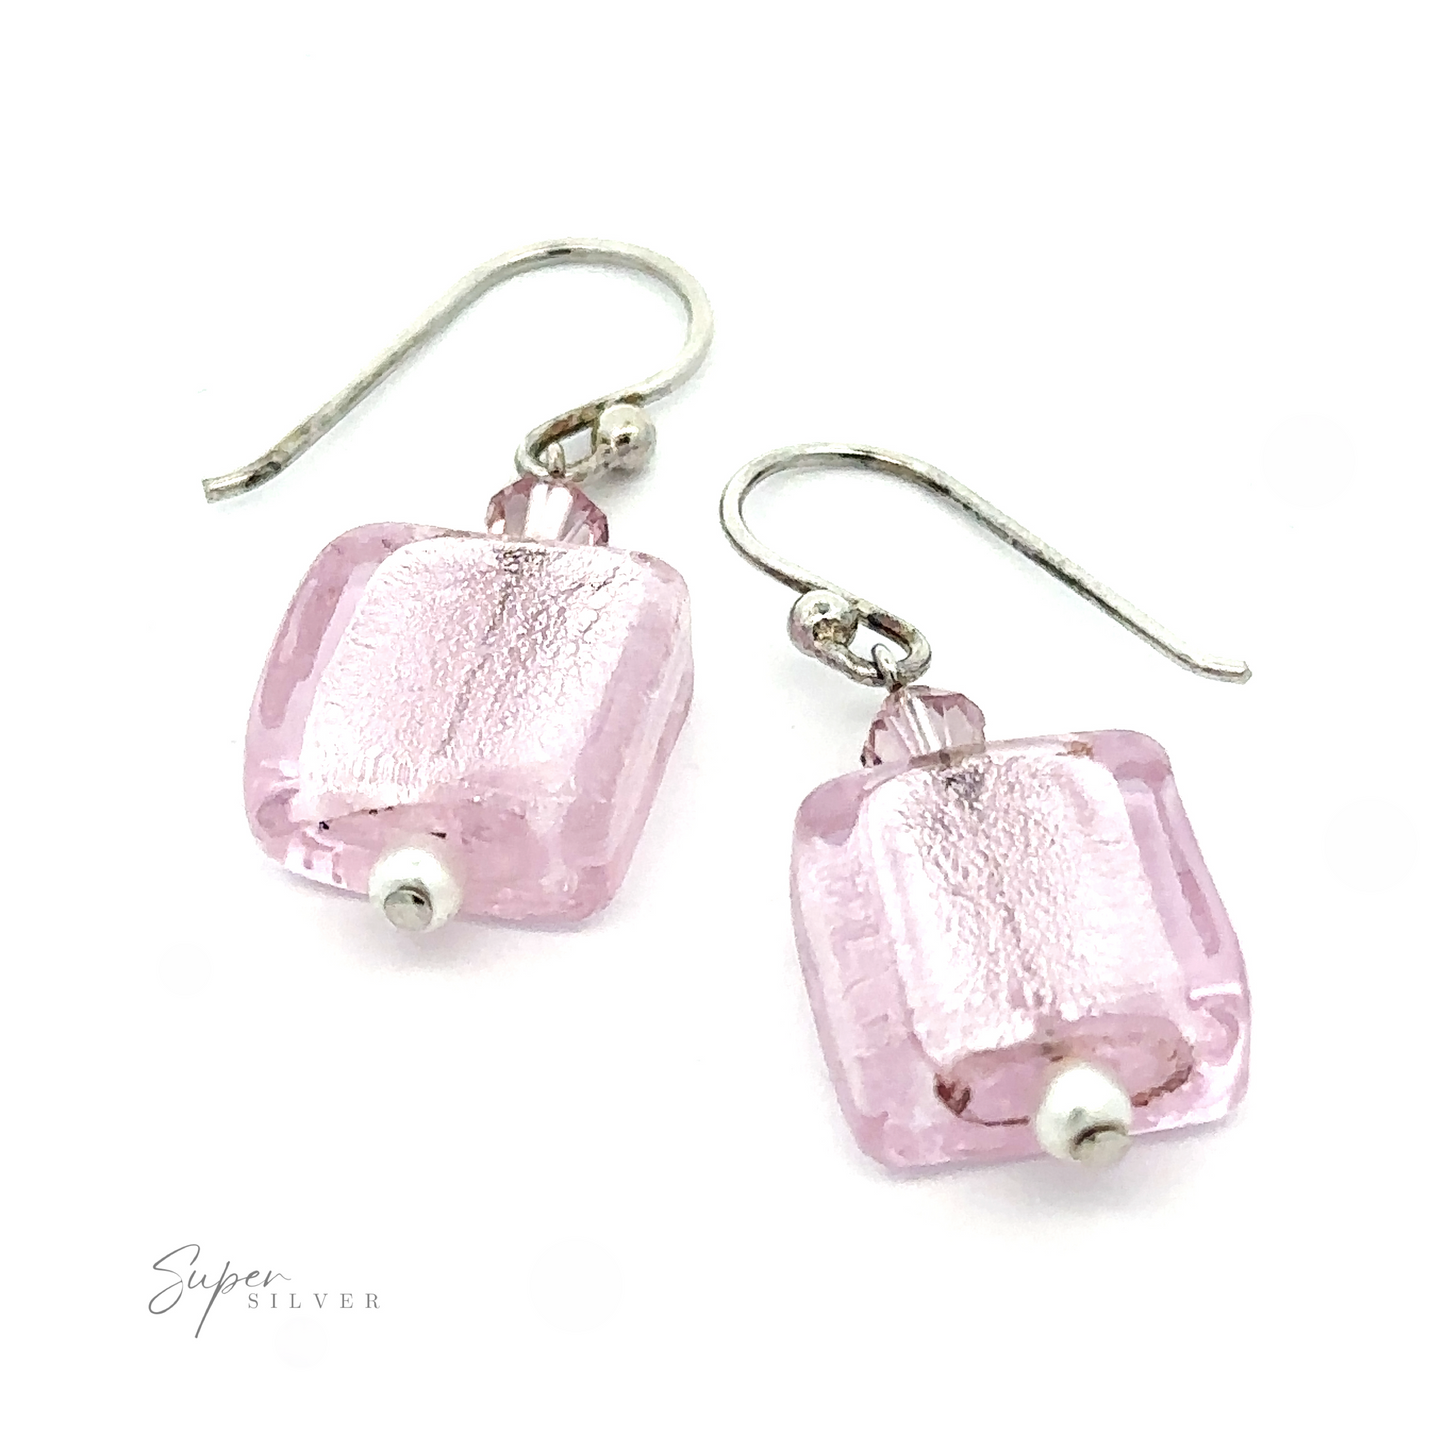 
                  
                    A pair of Beaded Resin Earrings with Small Pearls featuring translucent pink square beads with a small round silver bead at the bottom, attached to sterling silver hooks, showcasing a classic design.
                  
                